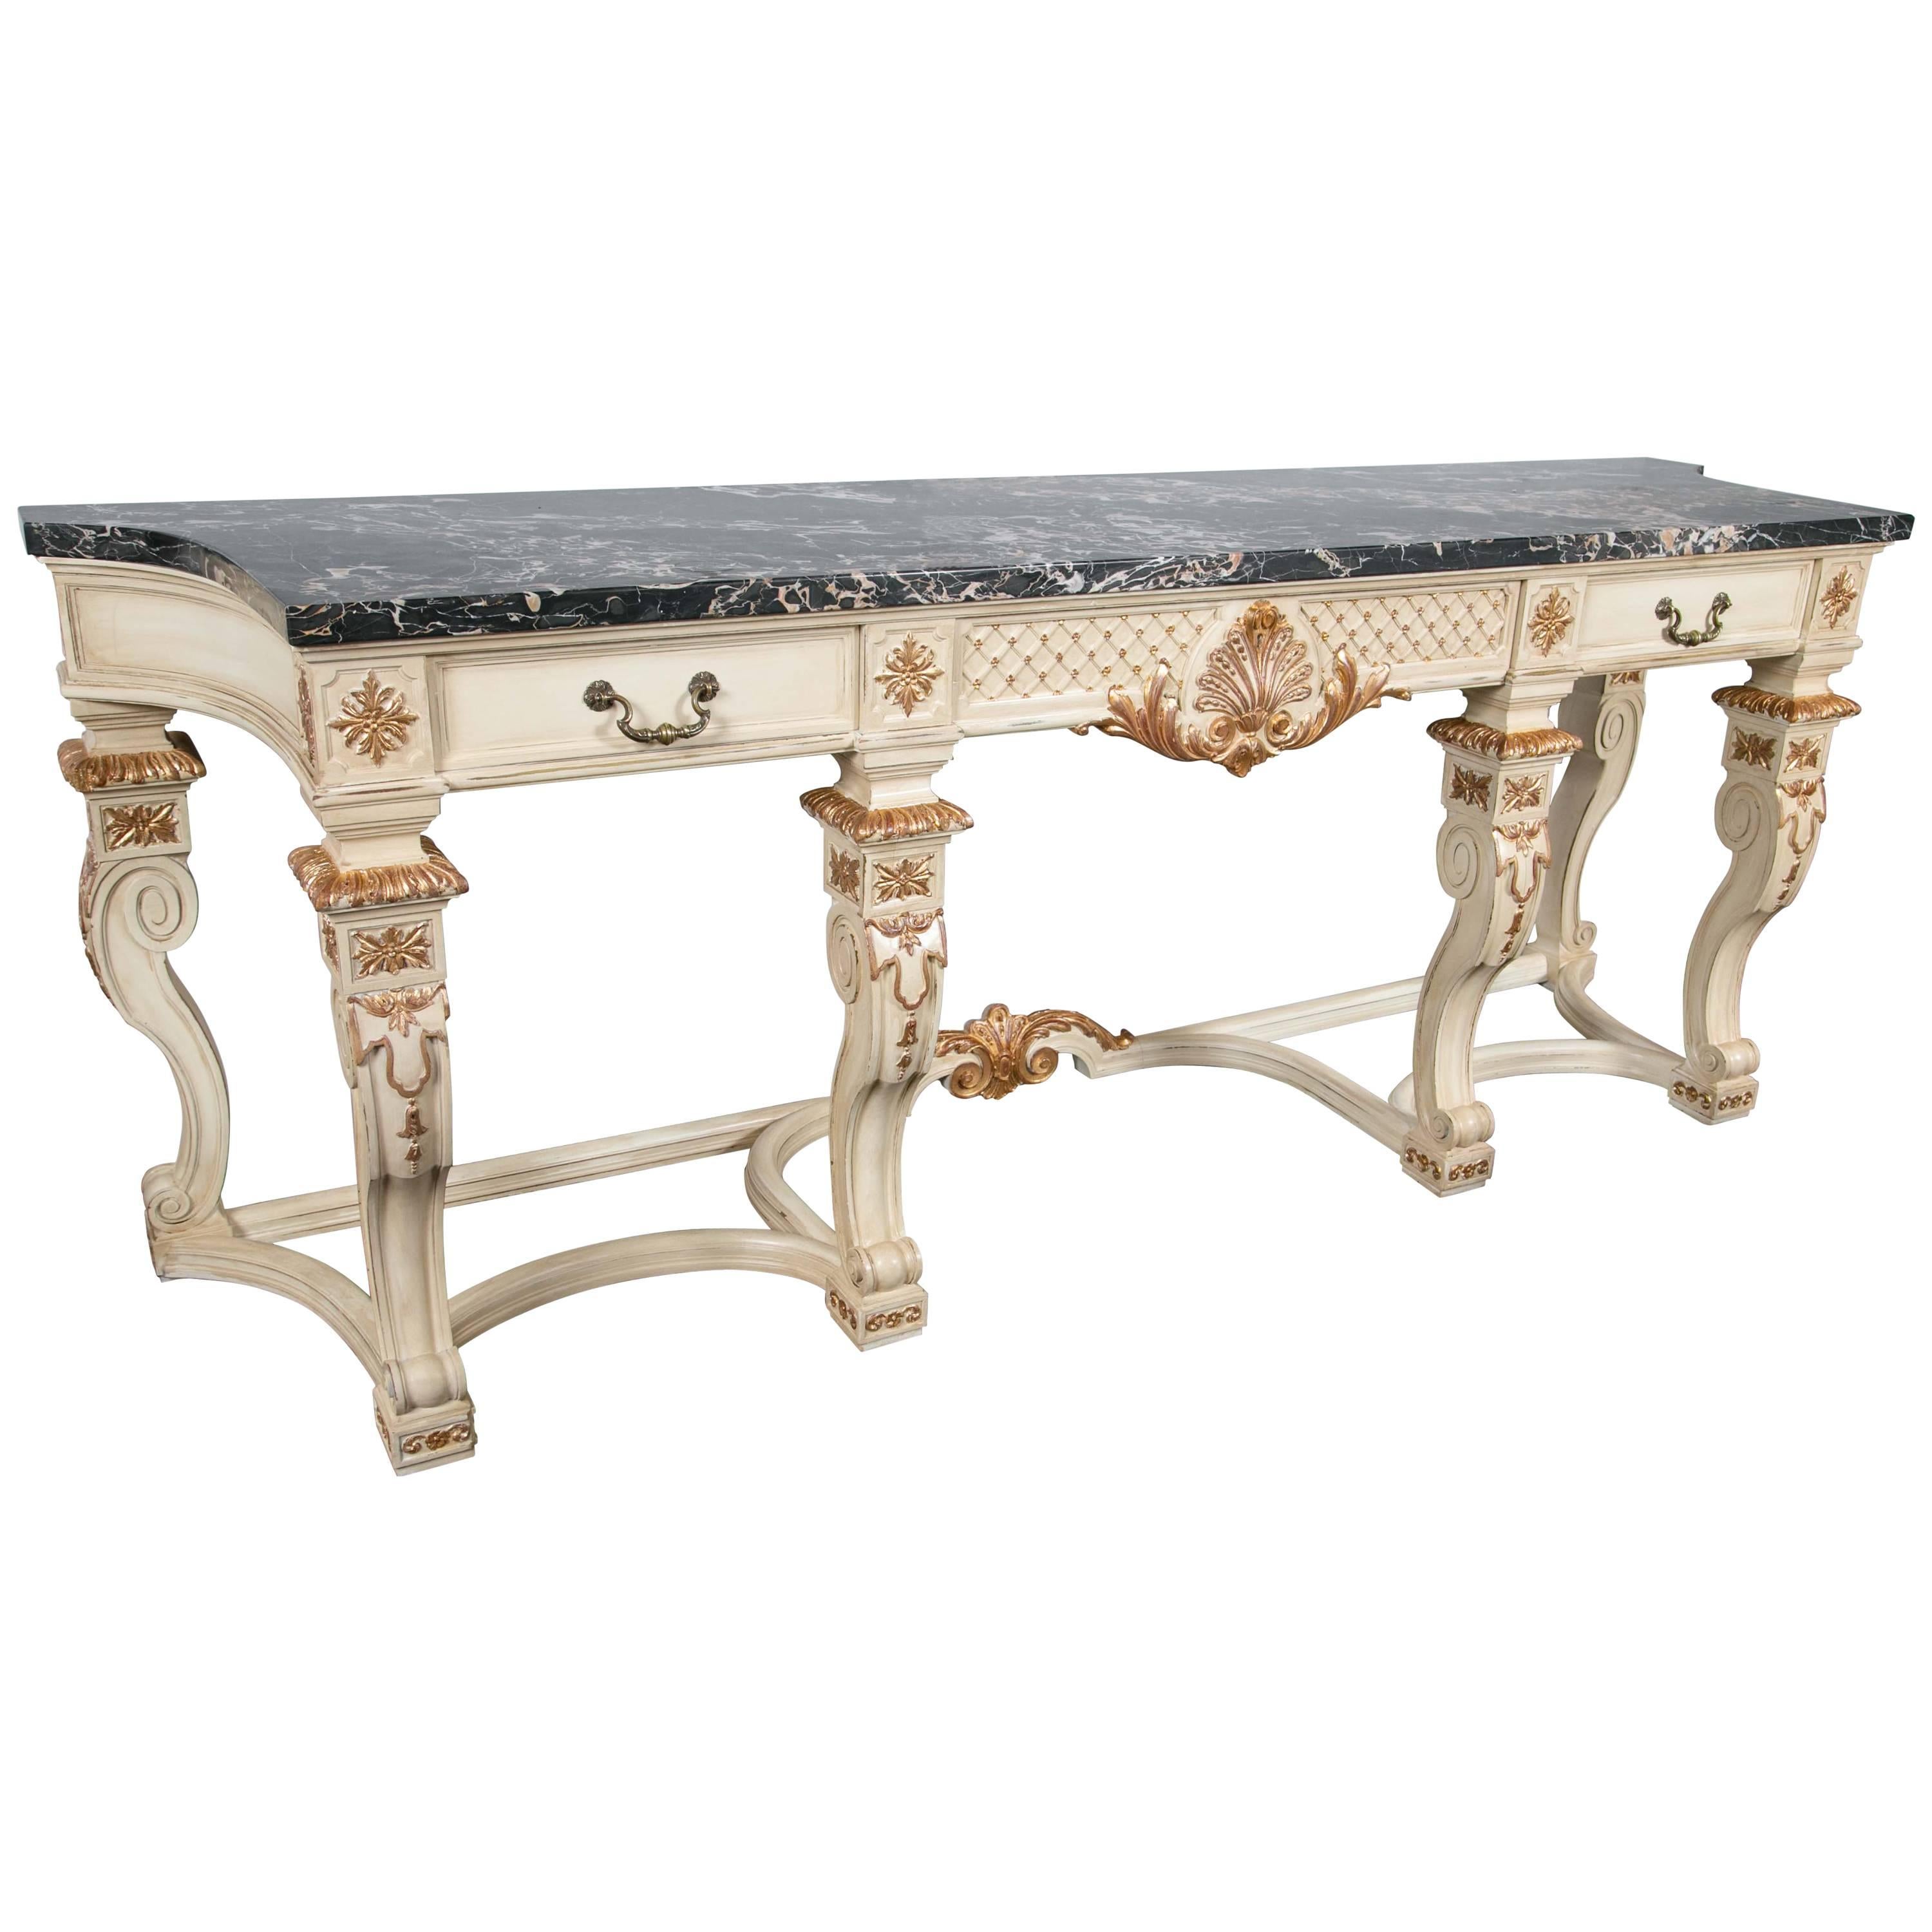 Fine Monumental Marble-Top Console/Sideboard by Jansen